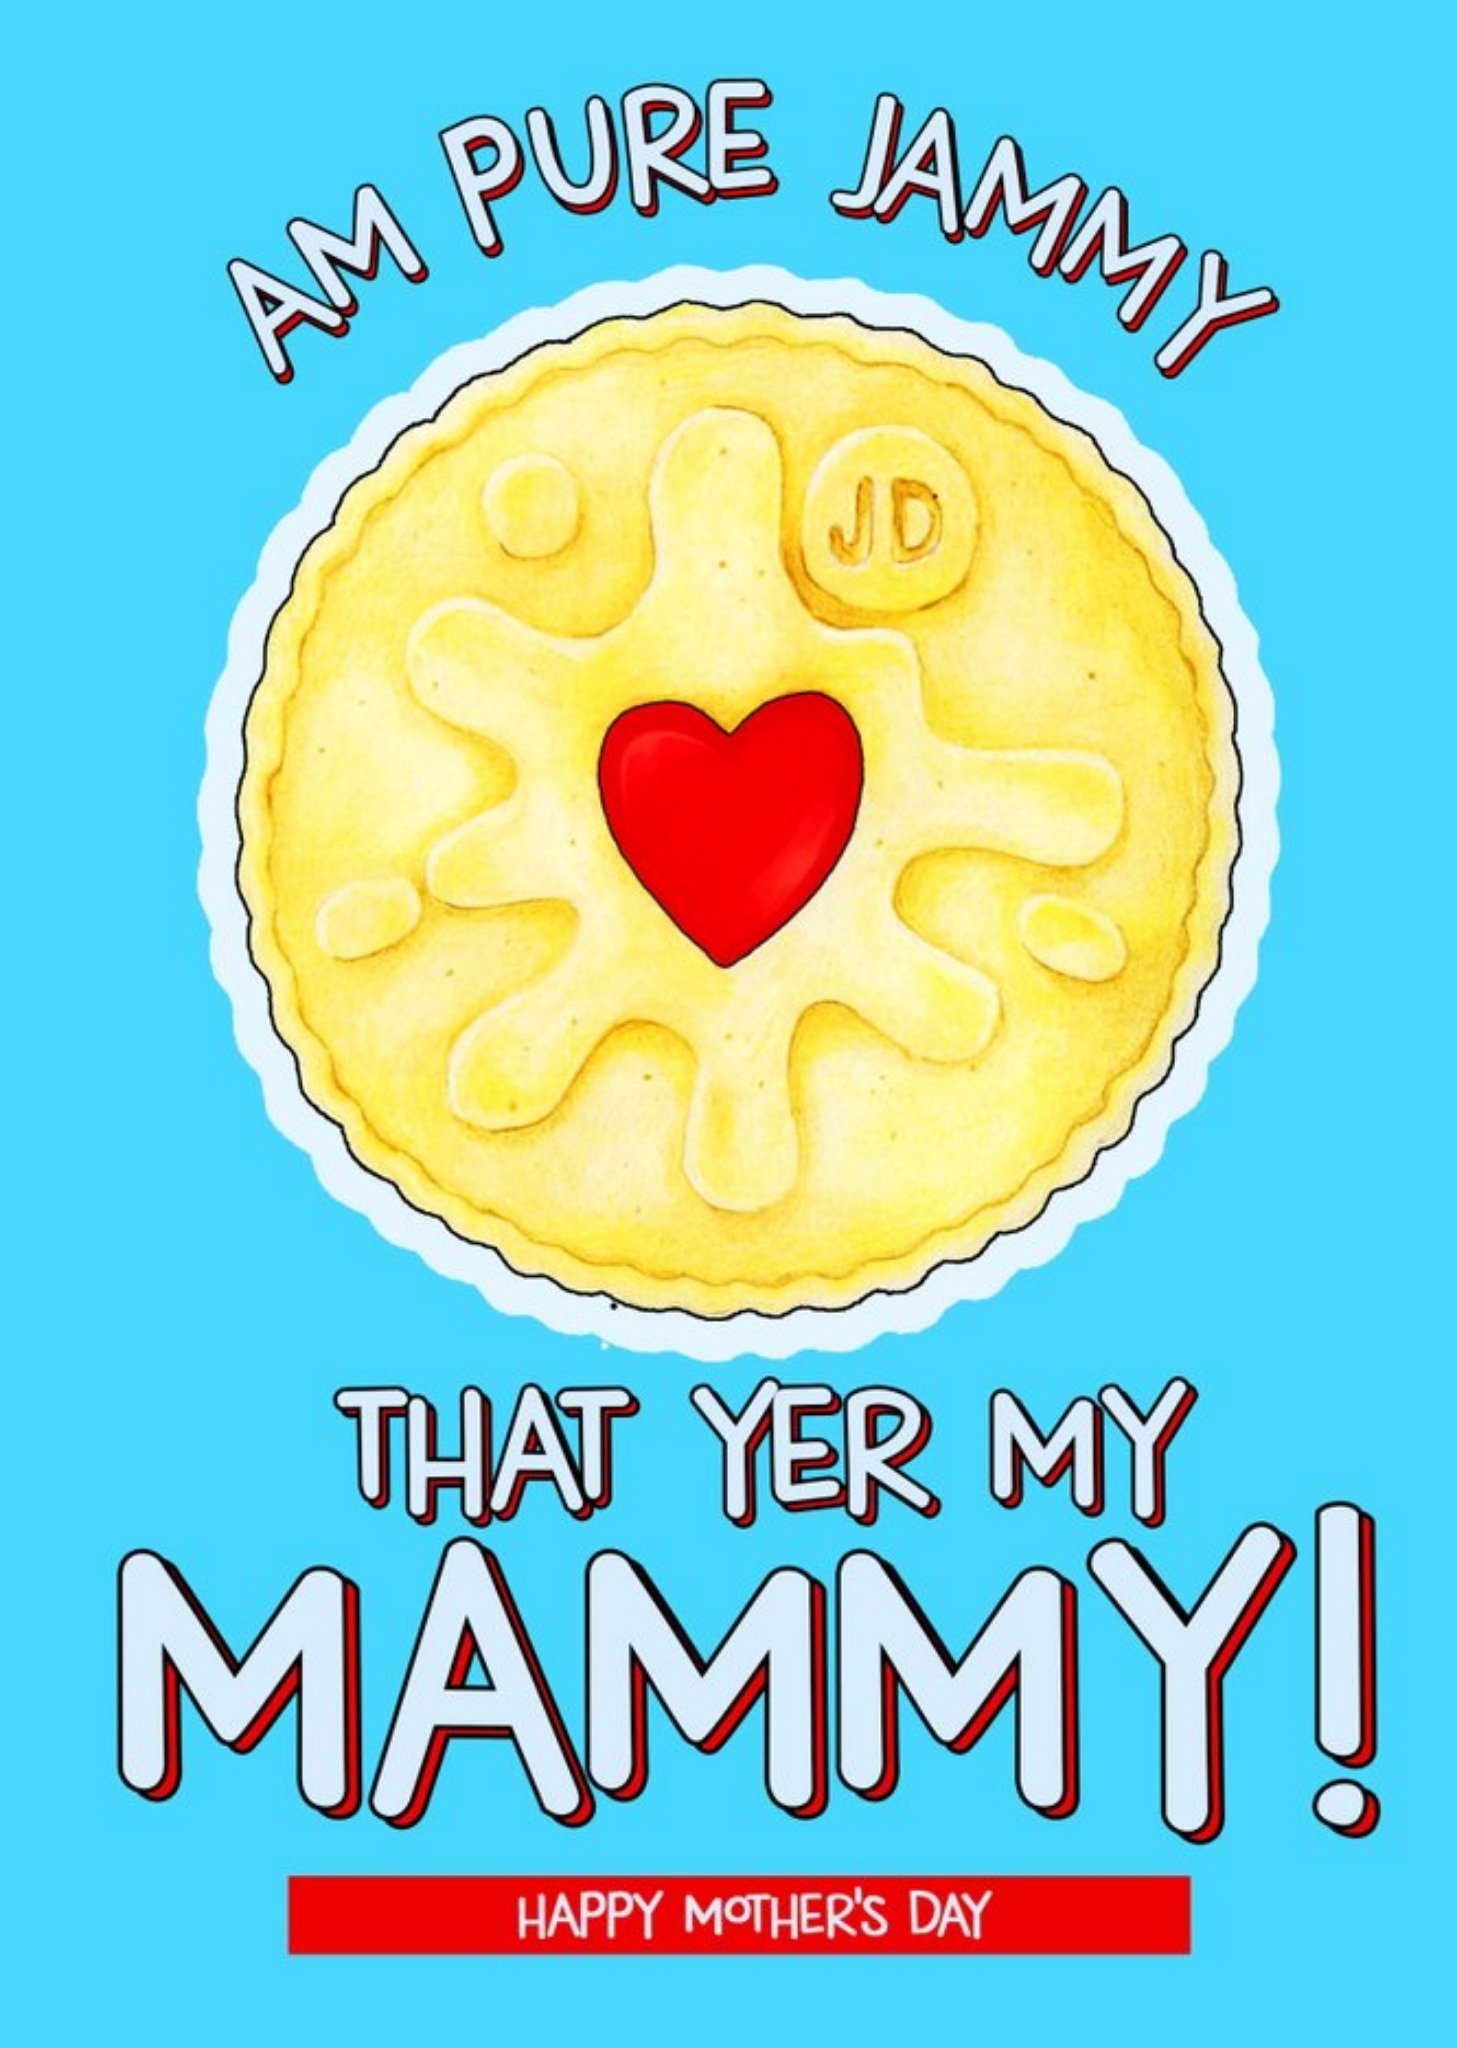 Love Hearts Ferry Clever Illustration Irish Pure Jammy Mother's Day Card Ecard